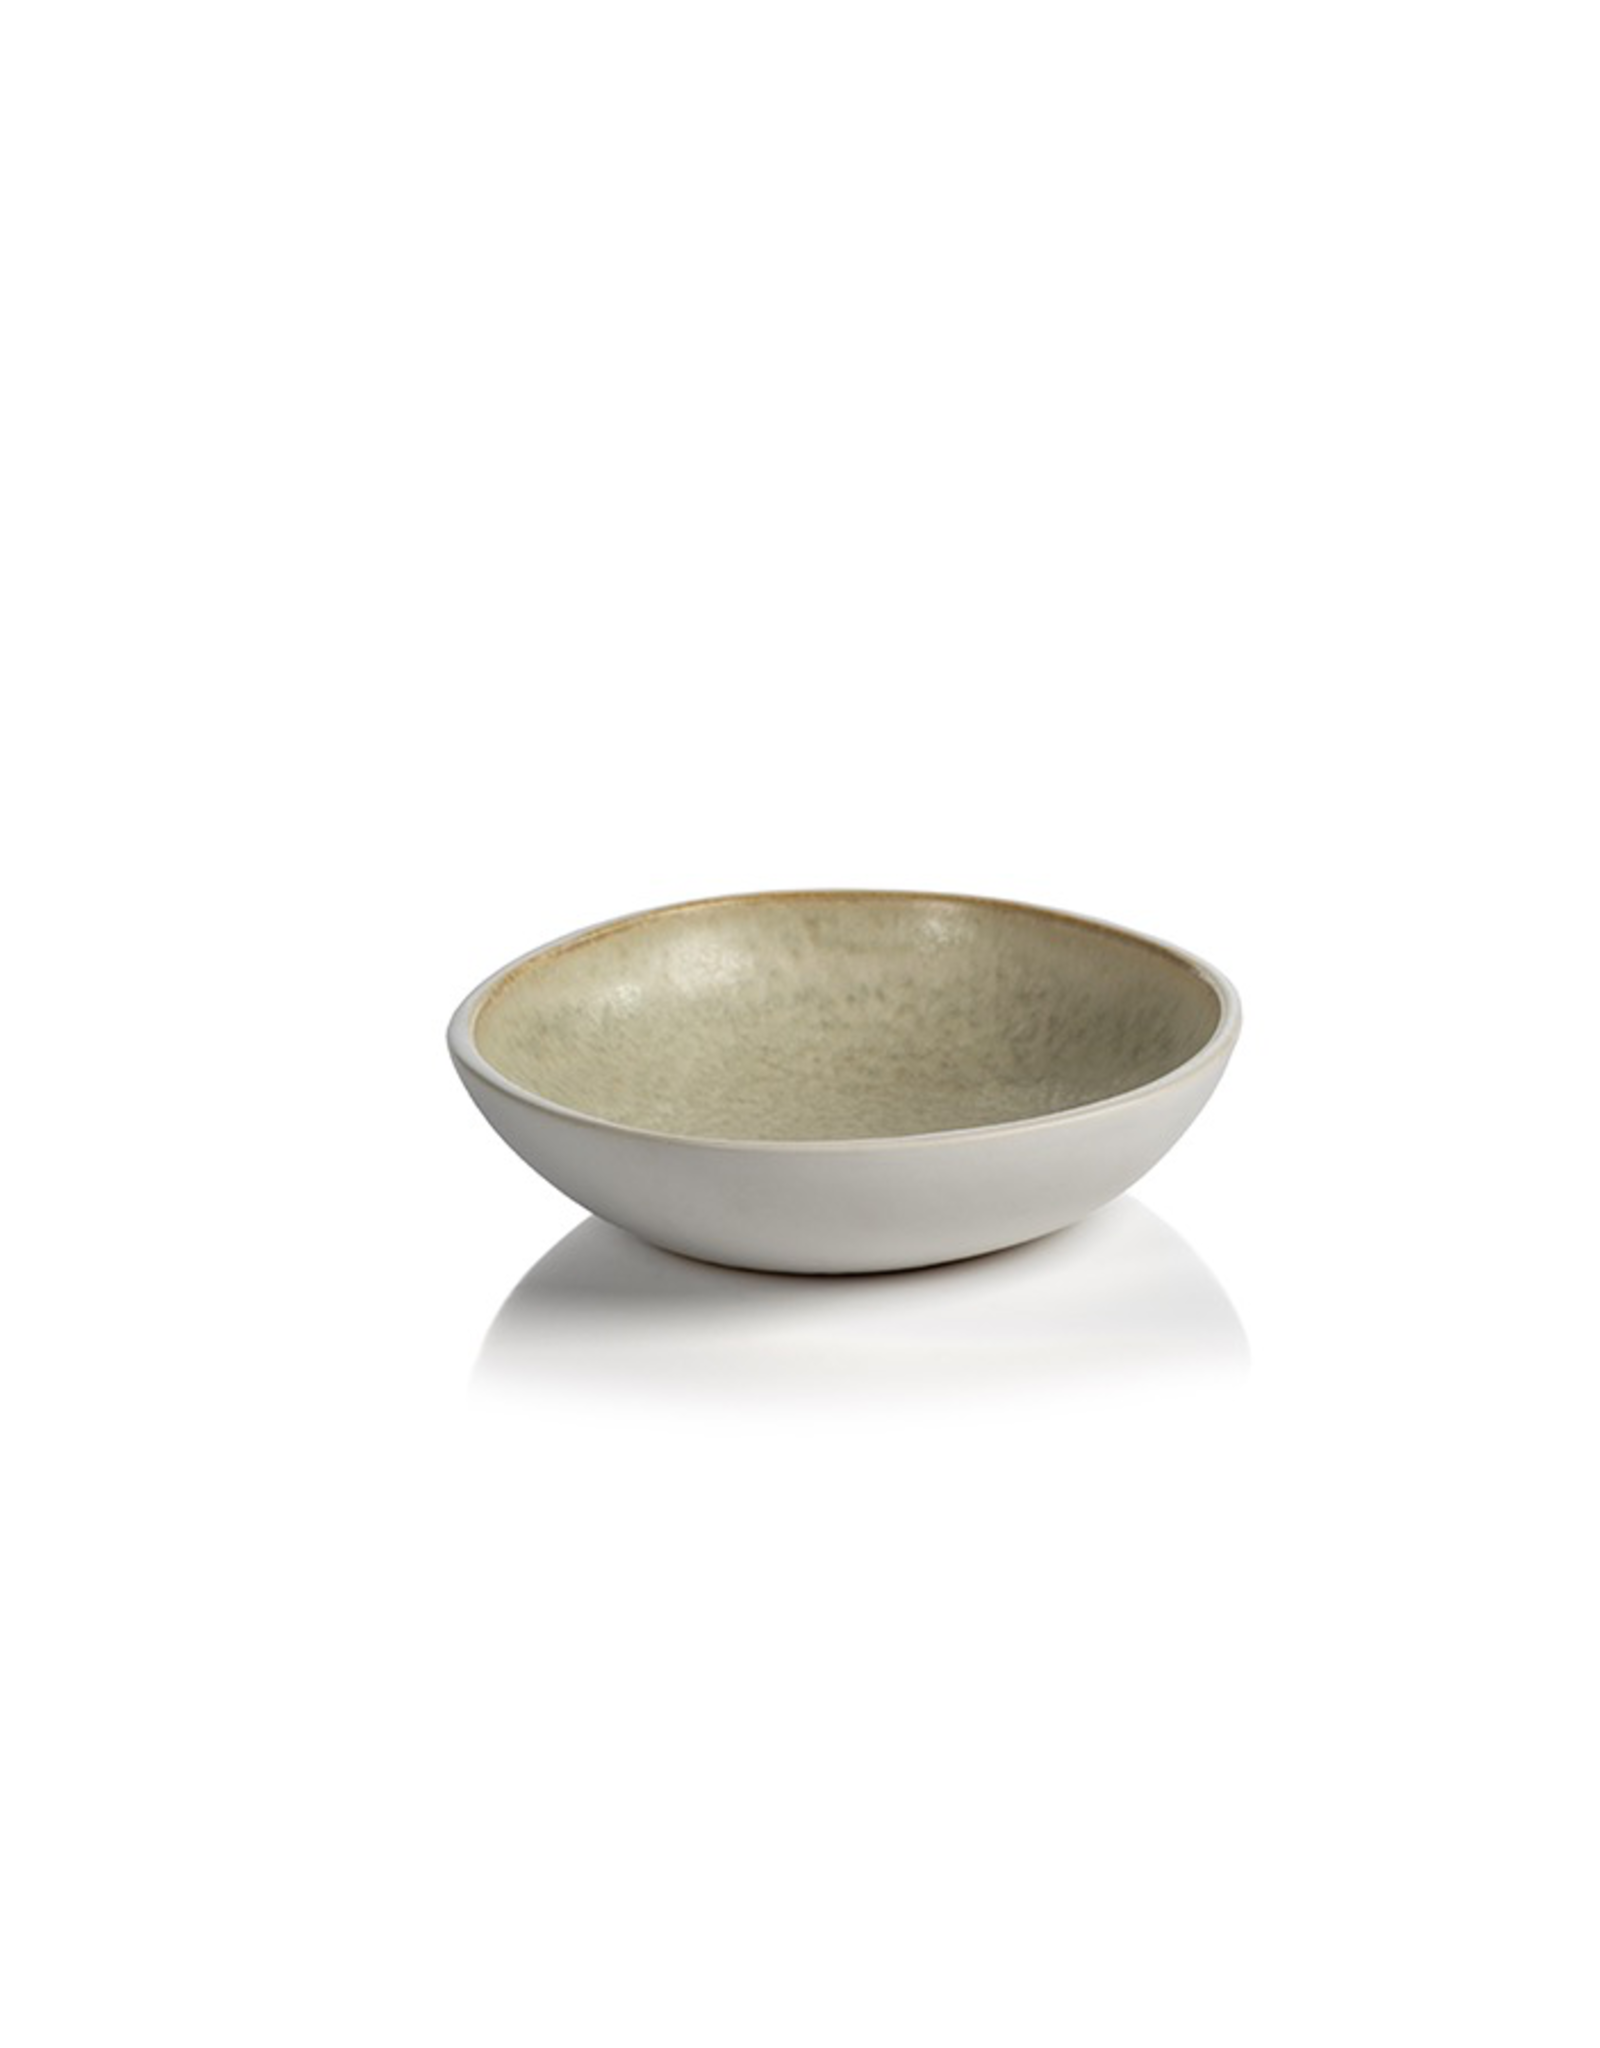 Small Kuoni Serving Bowl D 7.5”